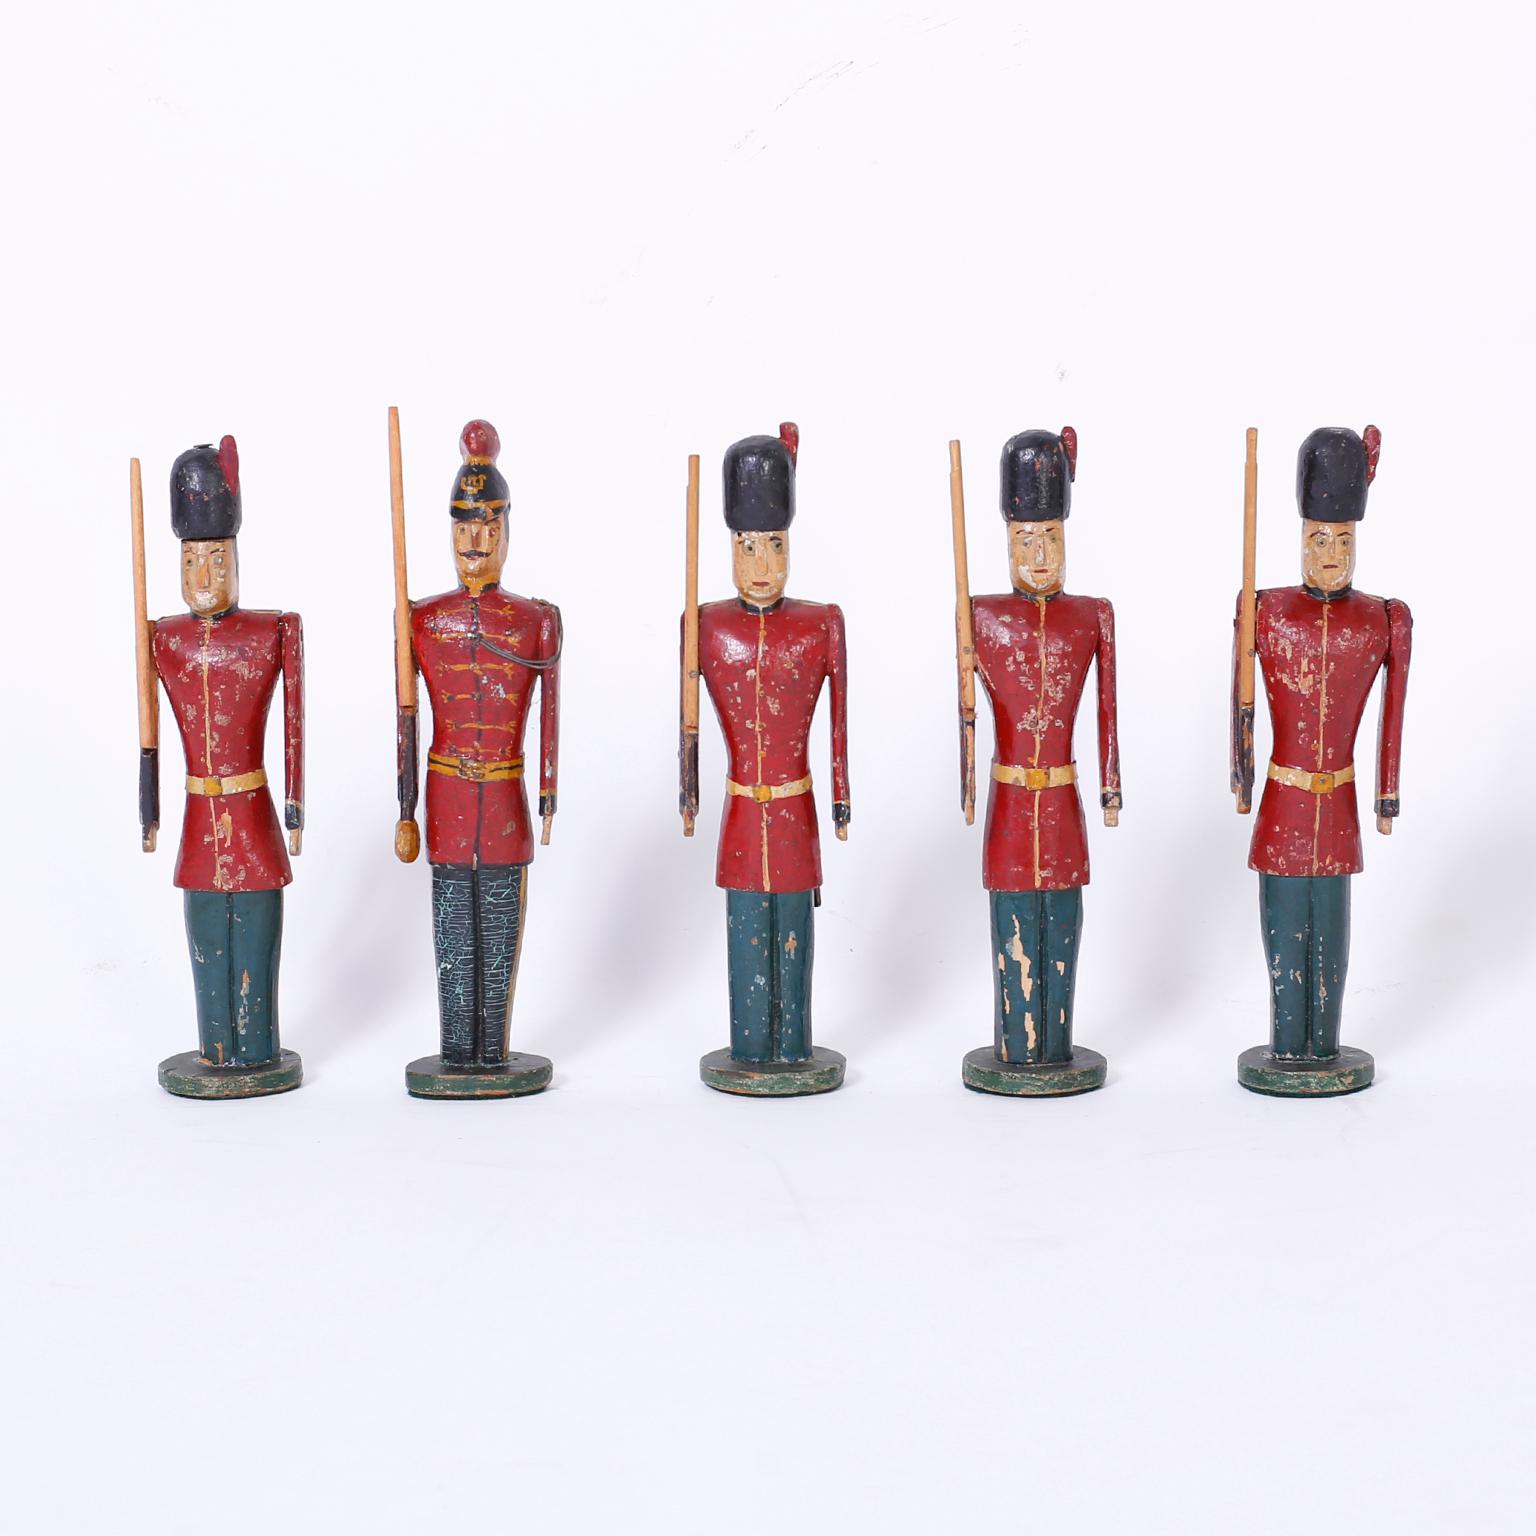 Eight charming antique carved wood figures displaying several versions of 19th century English military uniforms with diverse physical attributes. Original paint now aged to perfection.